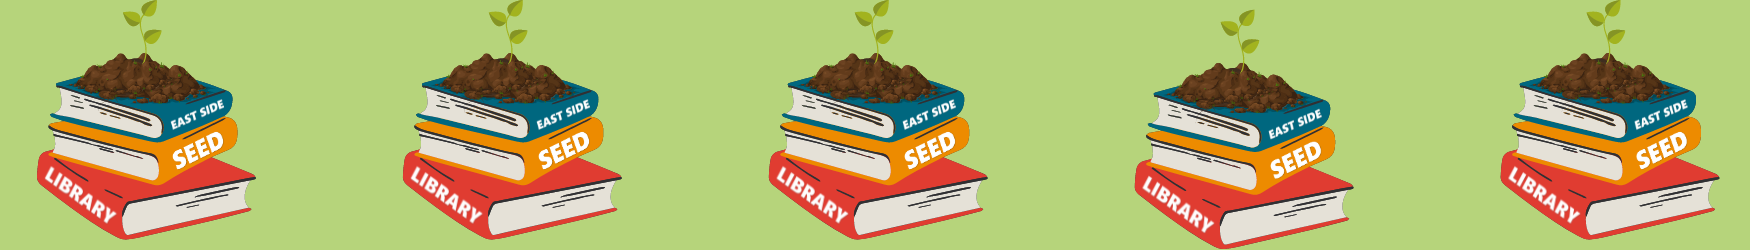 Repeating graphic of a stack of three books with a seedling growing on top. The spines of the books read "East Side Seed Library."